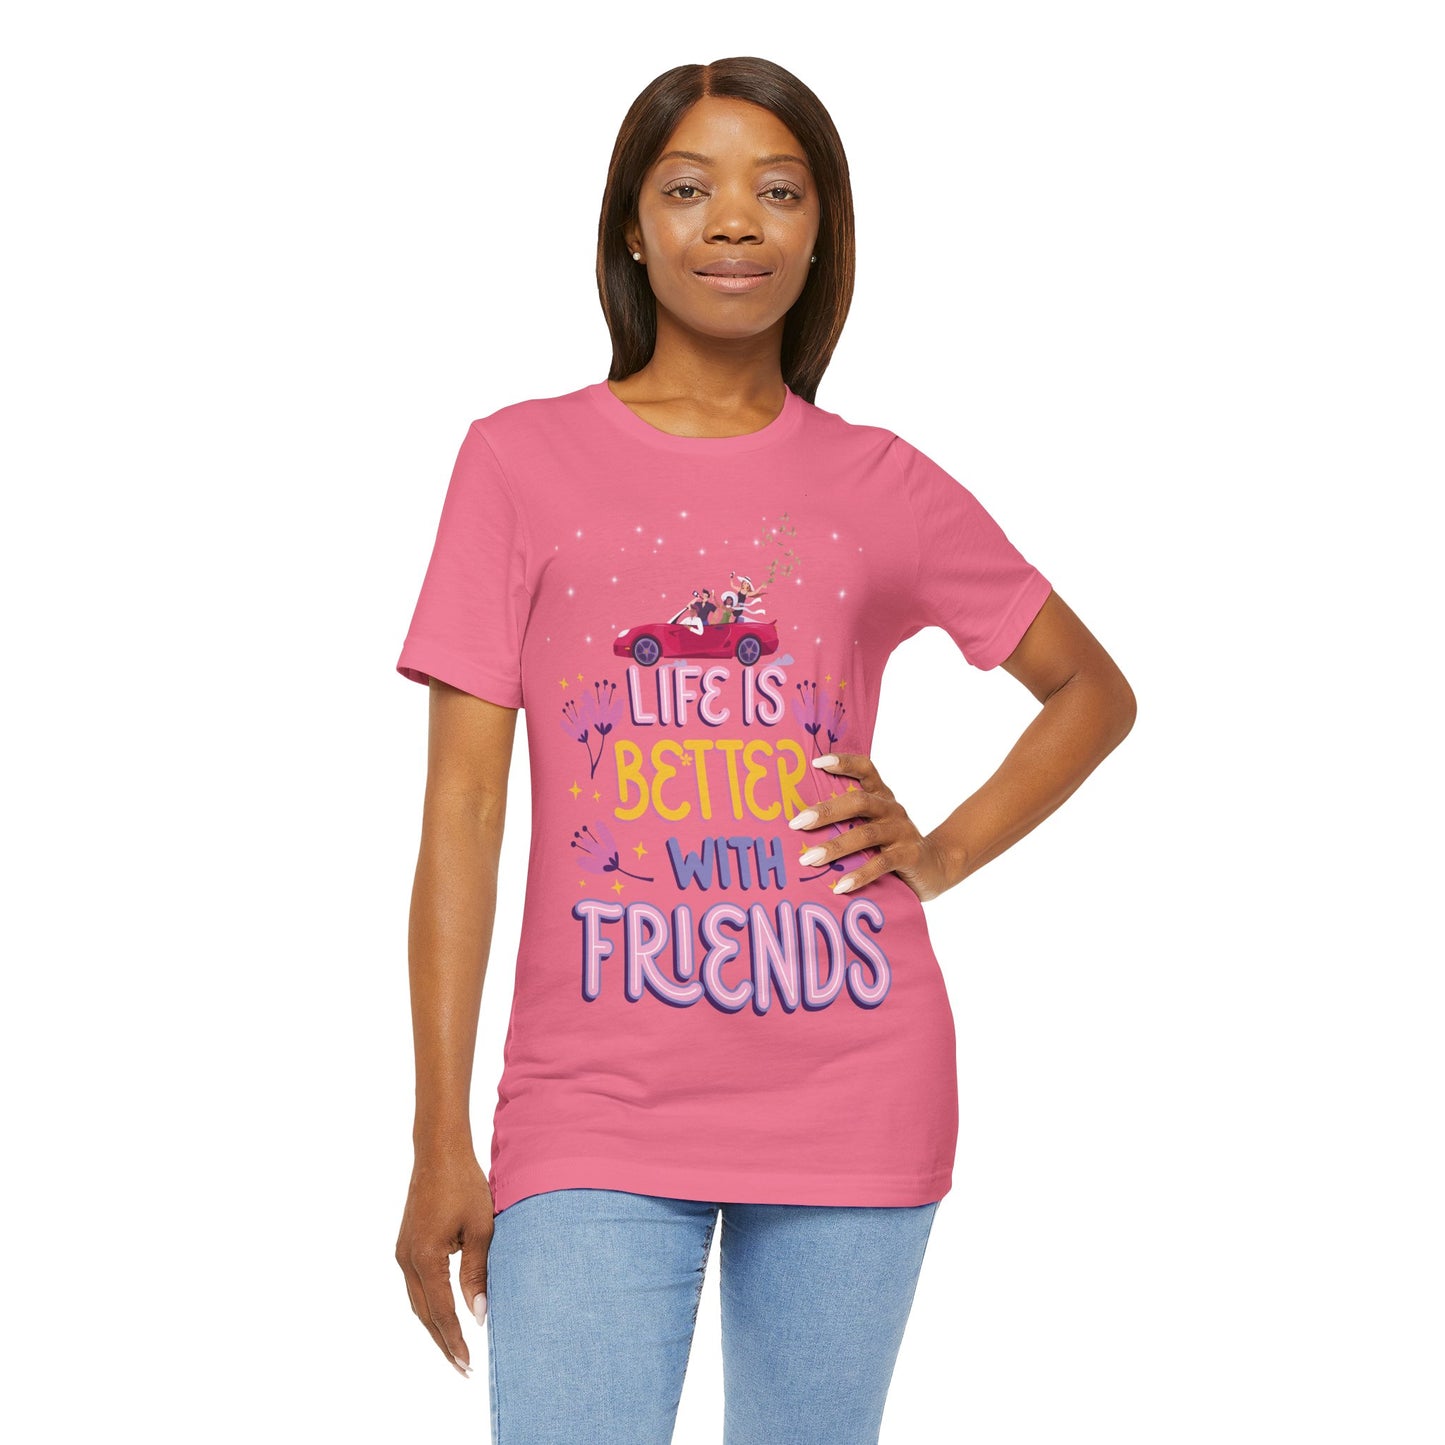 Life IS Better With Friends With Cash Jersey Short Sleeve Tee - Perfect Gift - Friends With Cash